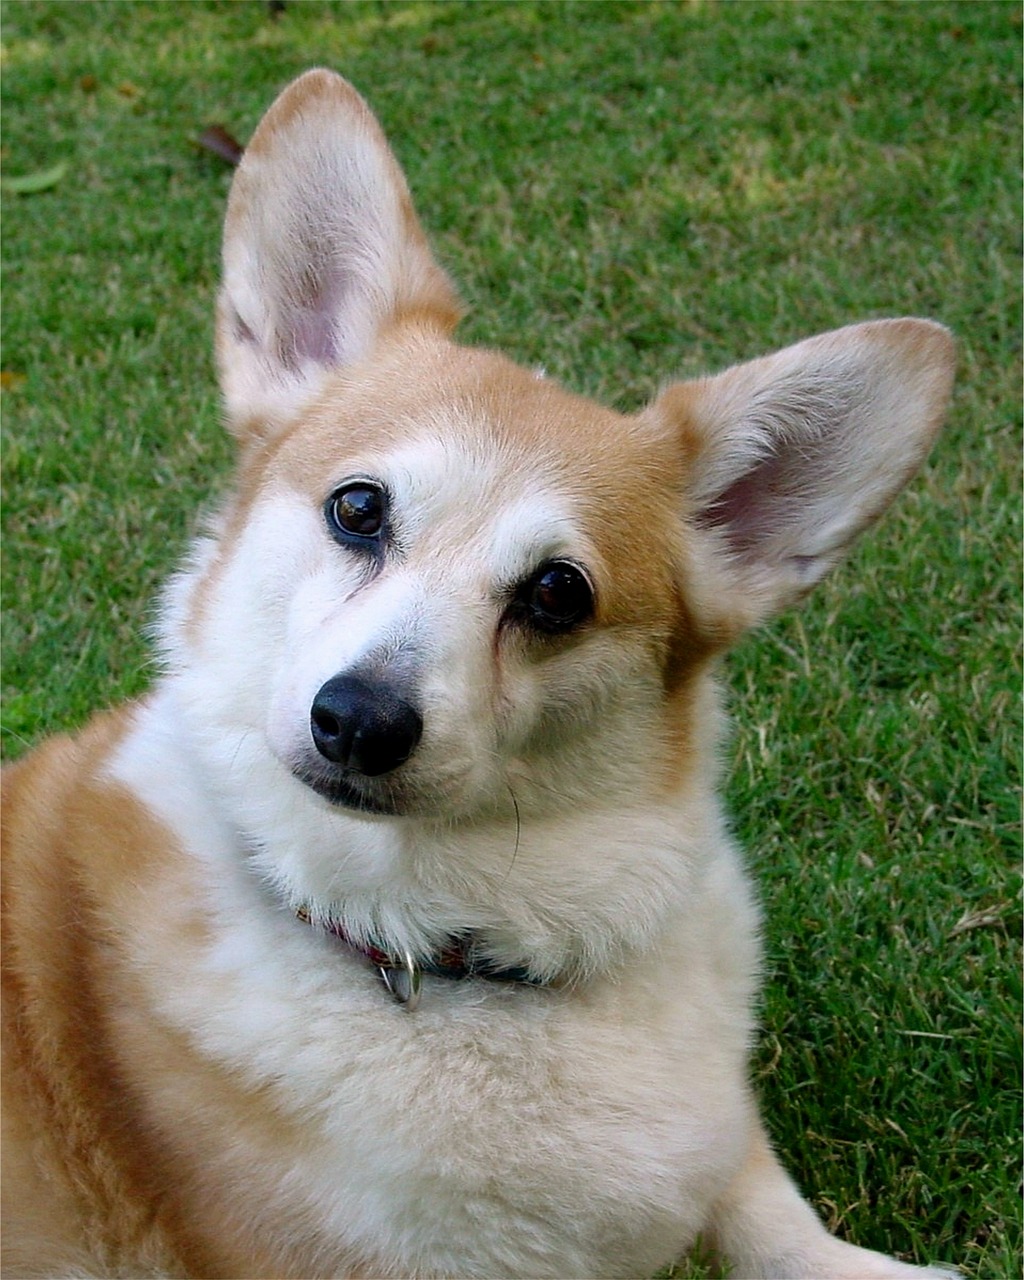 a brown and white dog laying on top of a lush green field, a portrait, by Nancy Spero, flickr, corgi with [ angelic wings ]!!, headshot of young female furry, 4yr old, wikimedia